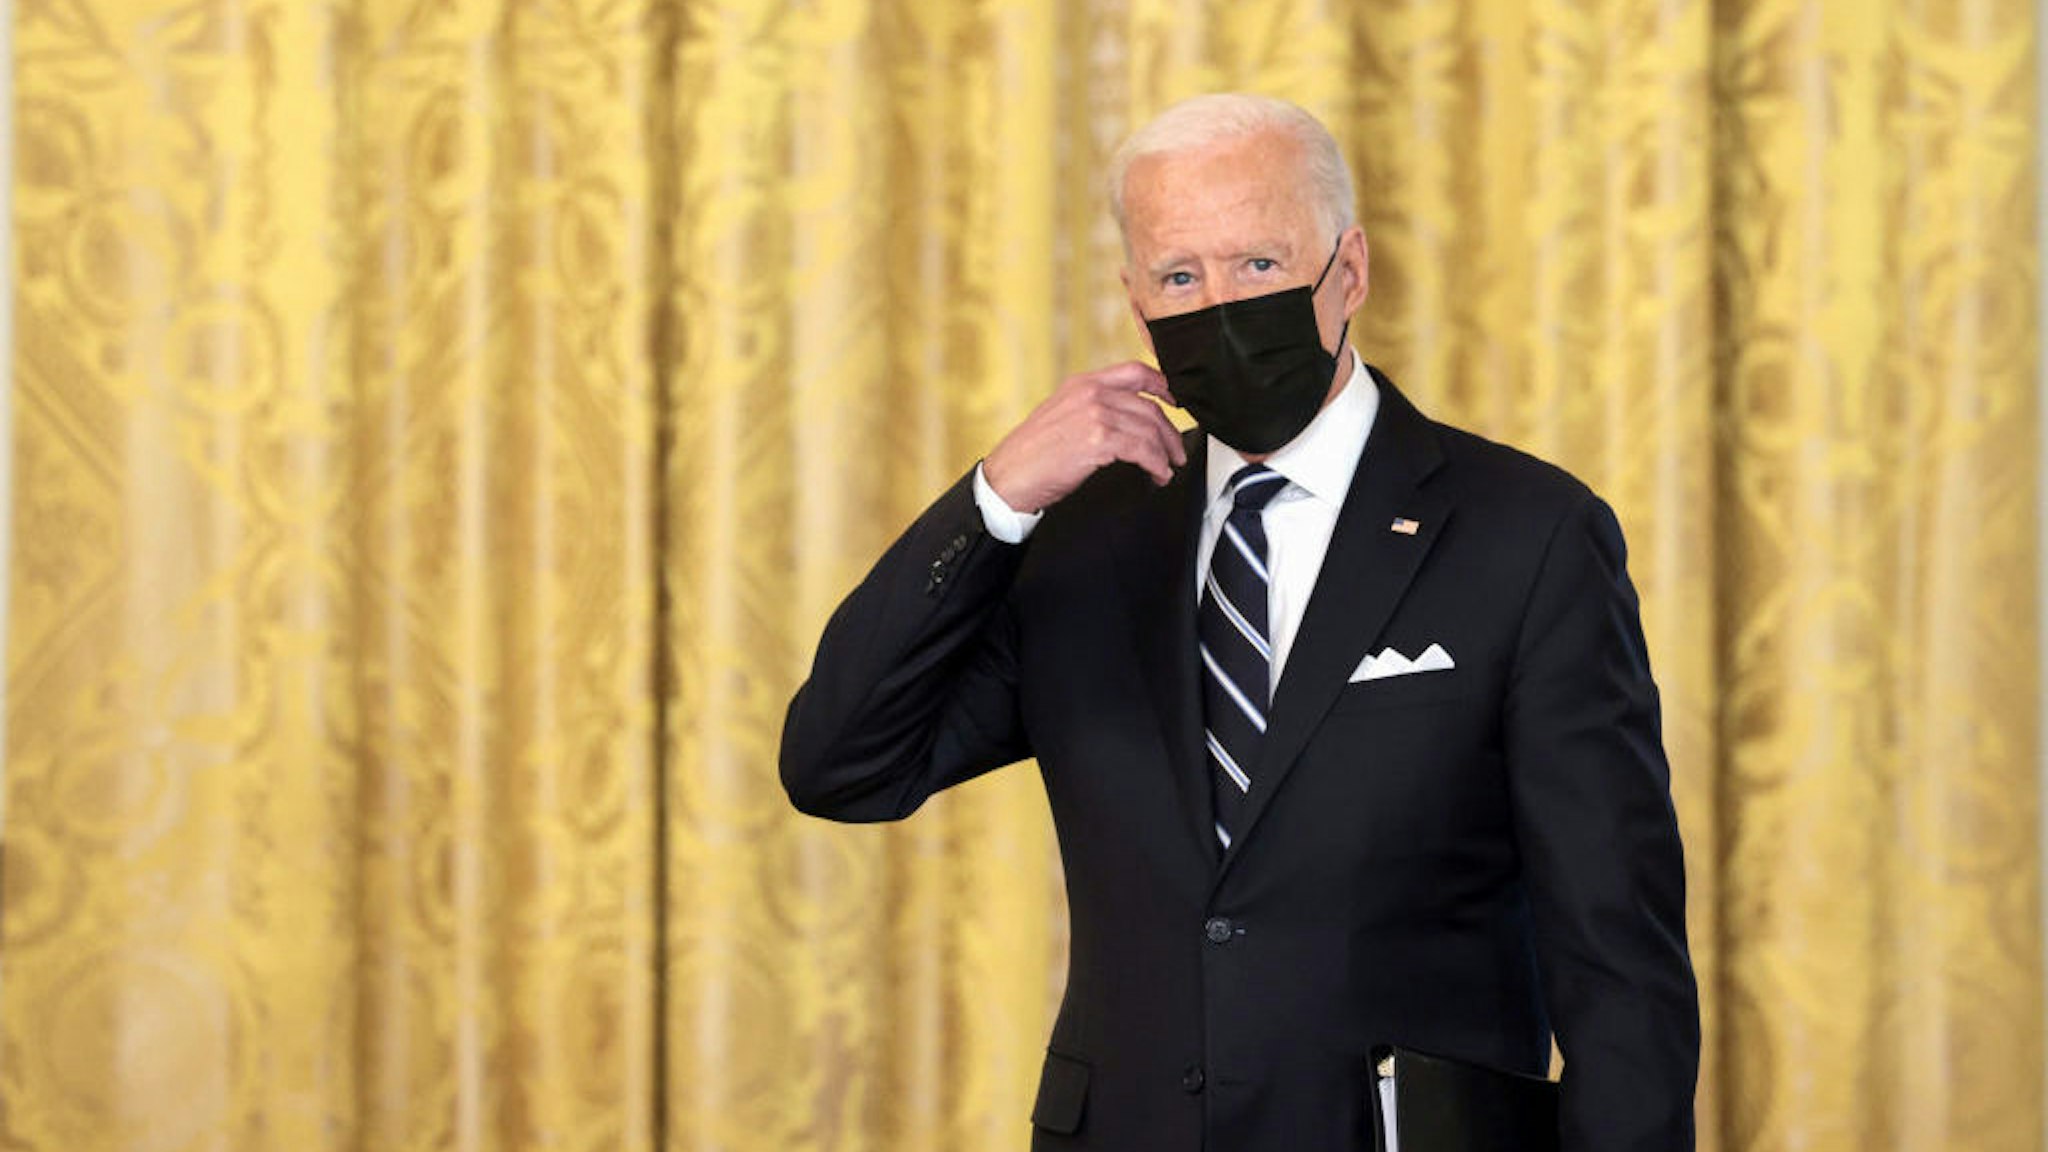 WASHINGTON, DC - AUGUST 18: U.S. President Joe Biden removes his face mask as he arrives to deliver remarks on the COVID-19 response and the vaccination program in the East Room of the White House on August 18, 2021 in Washington, DC. During his remarks, President Biden announced that he is ordering the United States Department of Health and Human Services to require nursing homes to have vaccinated staff in order for them to receive Medicare and Medicaid funding. The President also announced that Americans would be able to receive a third booster shot against Covid-19. (Photo by Anna Moneymaker/Getty Images)